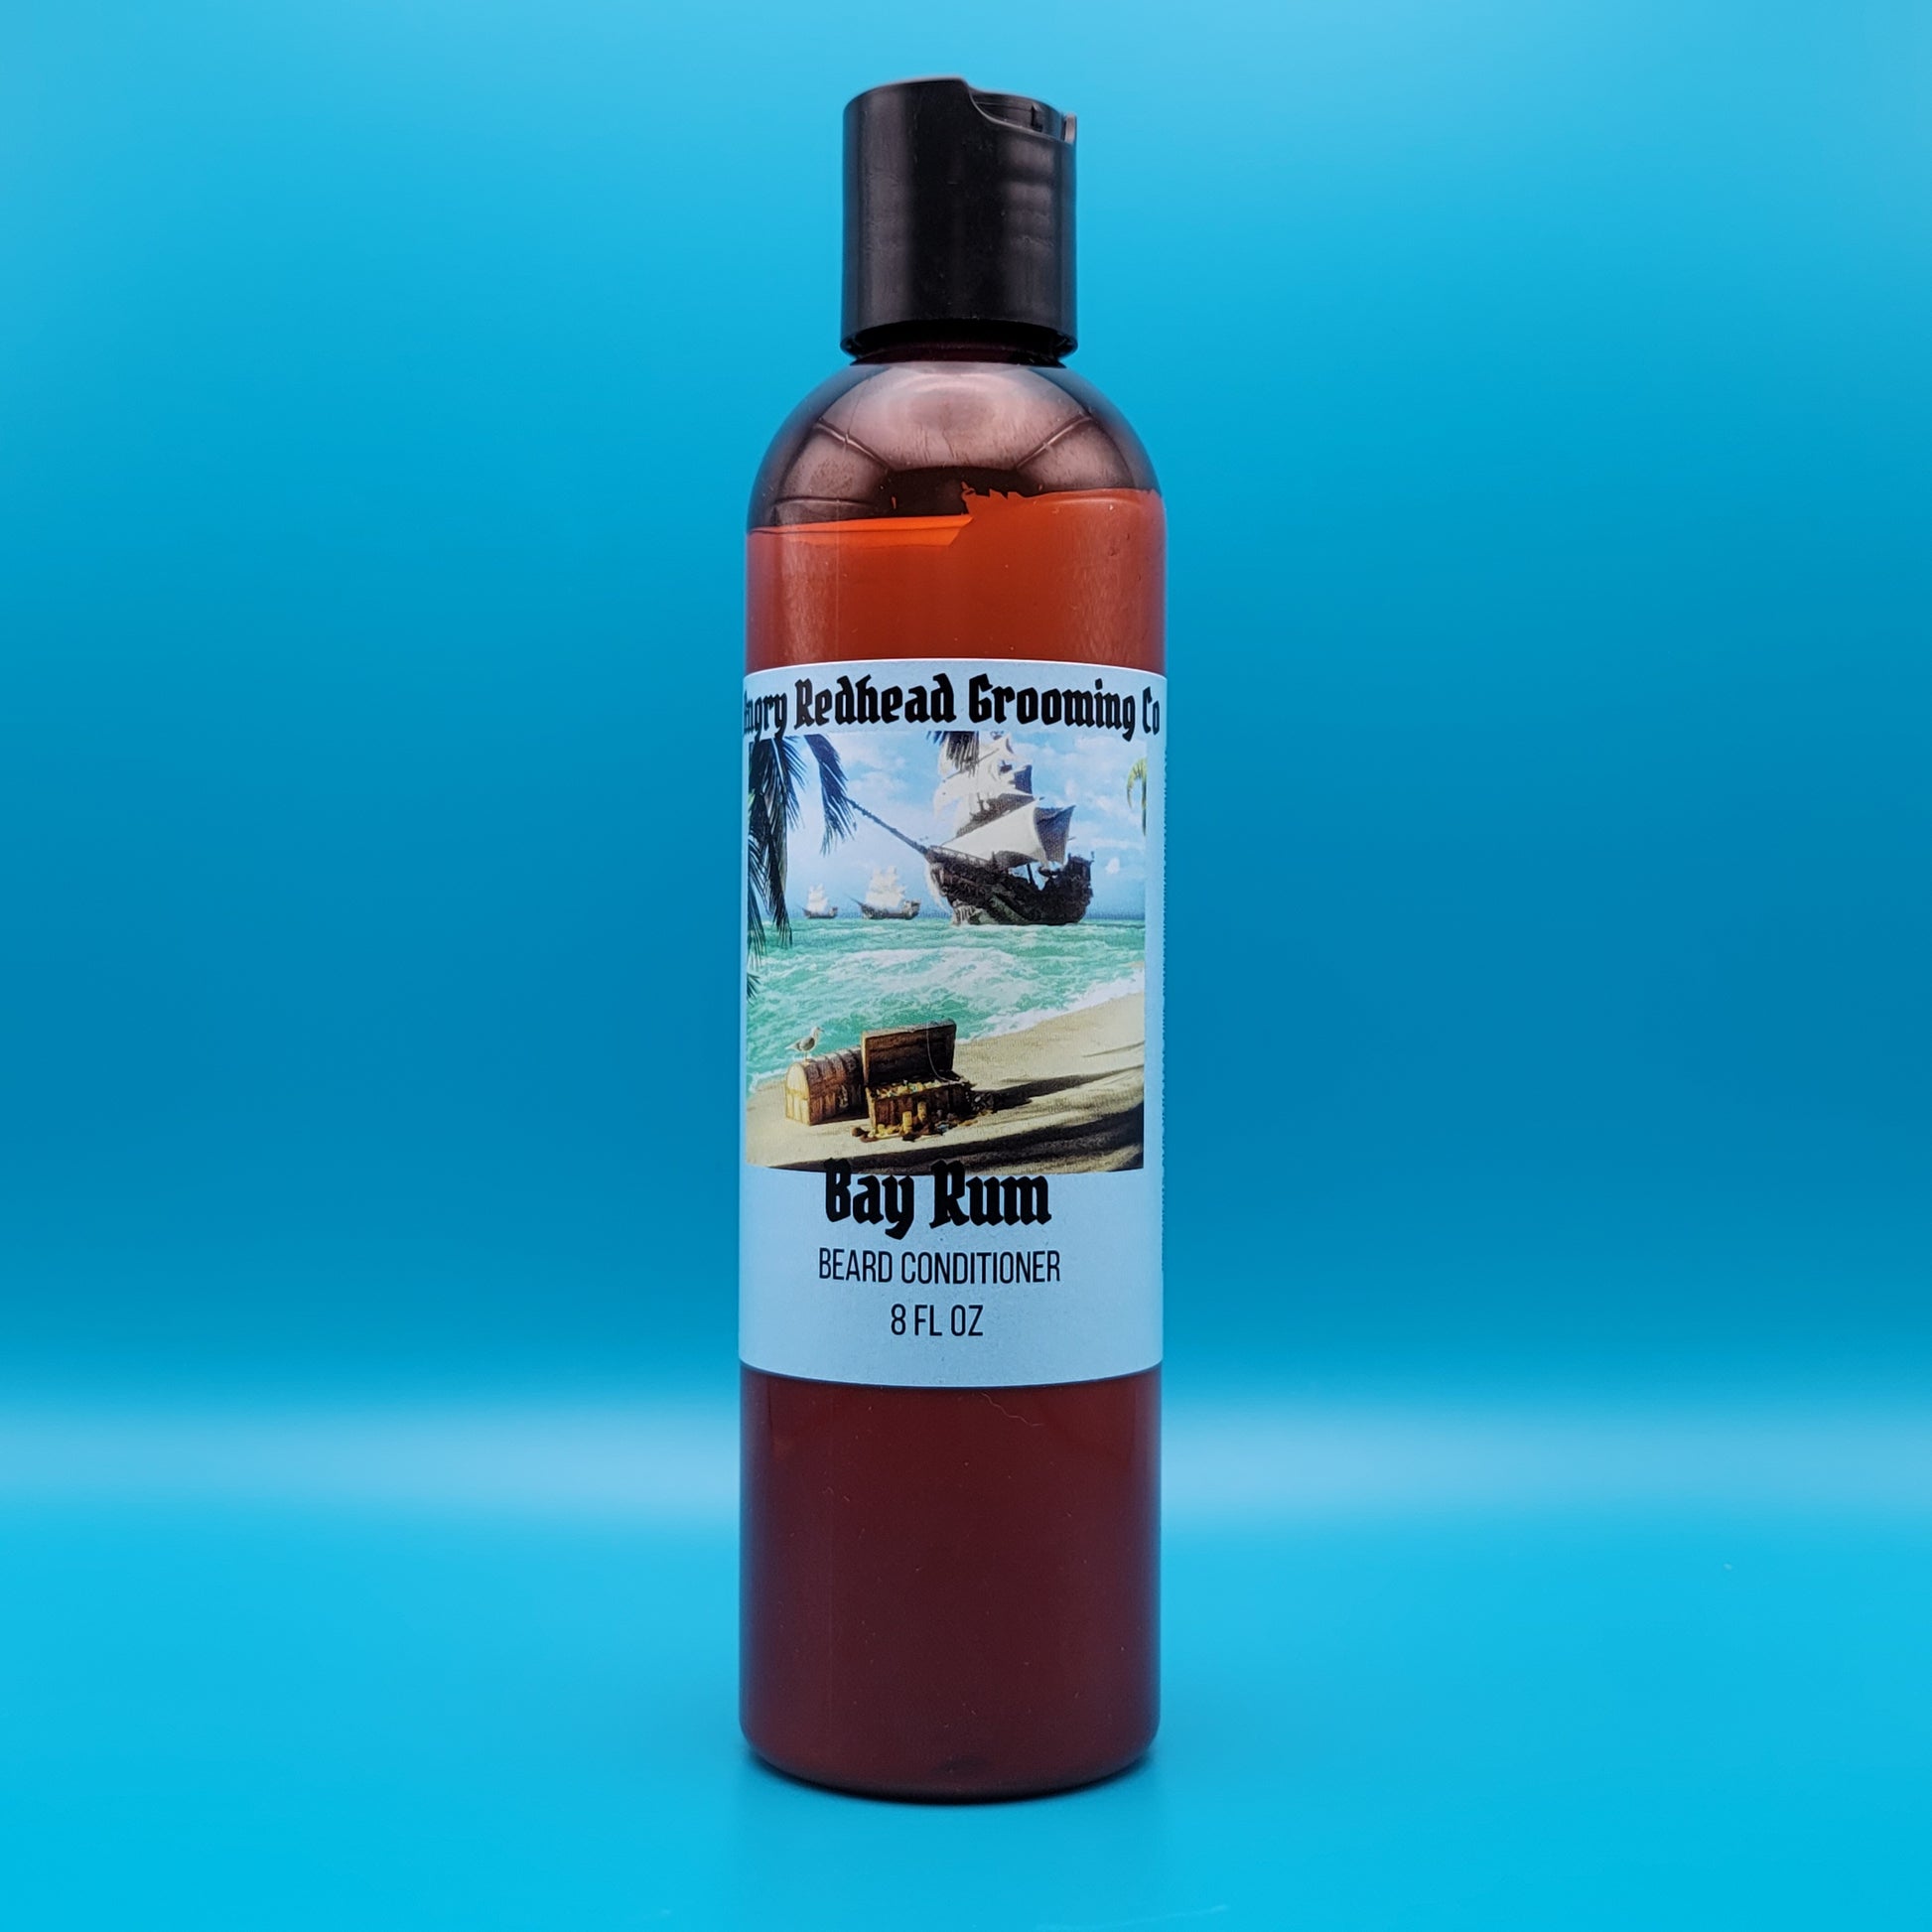 Bay Rum Beard Conditioner by Angry Redhead Grooming Co - angryredheadgrooming.com